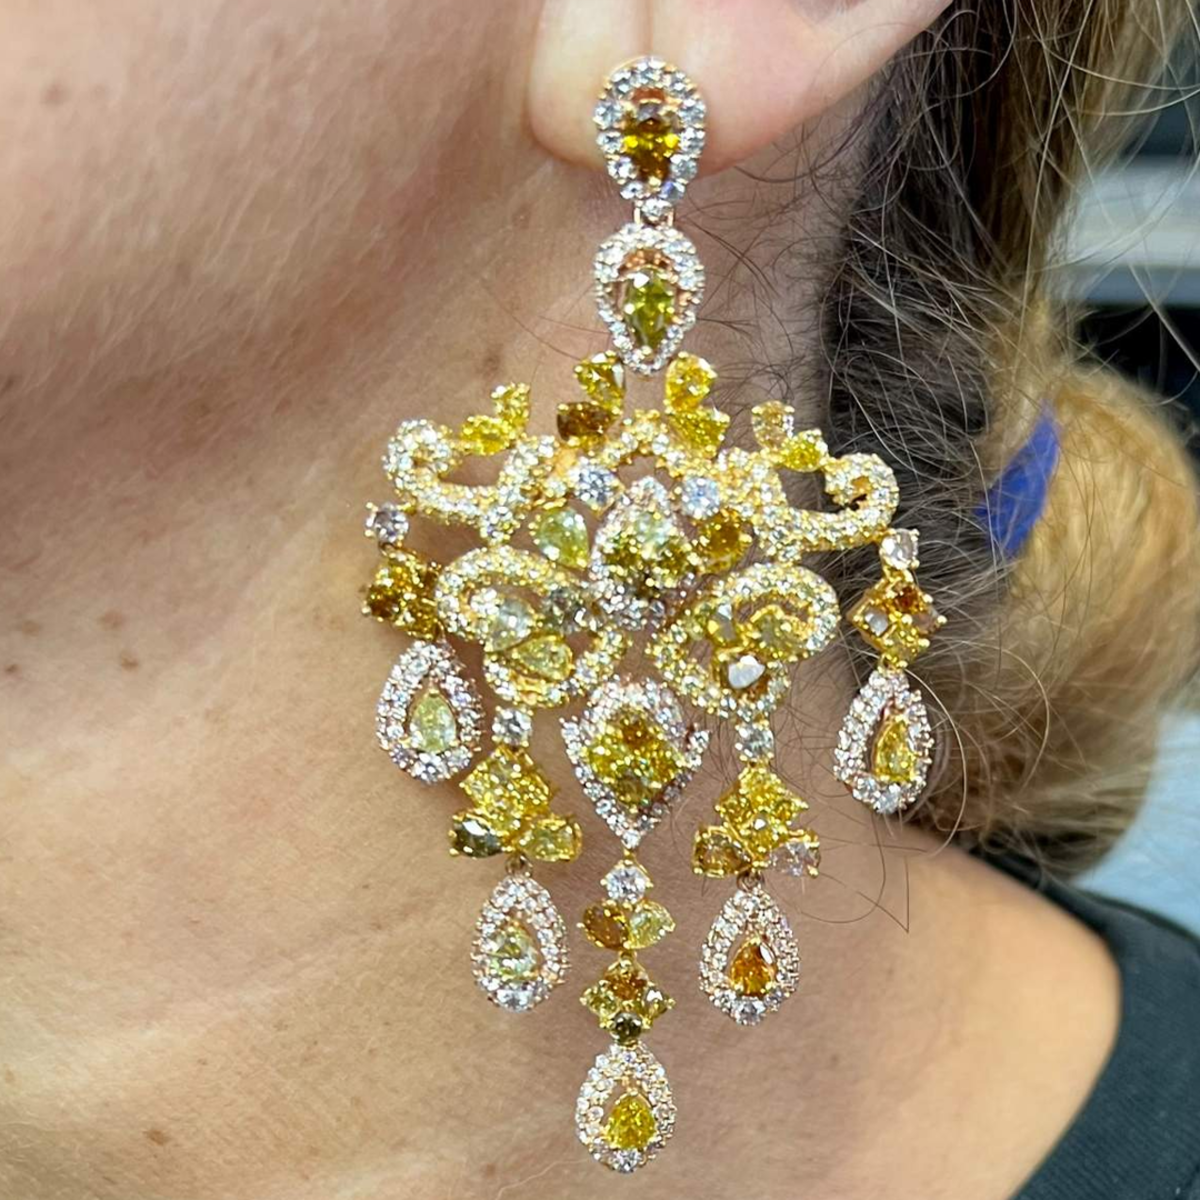 Post-1980s 18KT Yellow Gold Natural Color Diamond Chandelier Earrings worn on ear